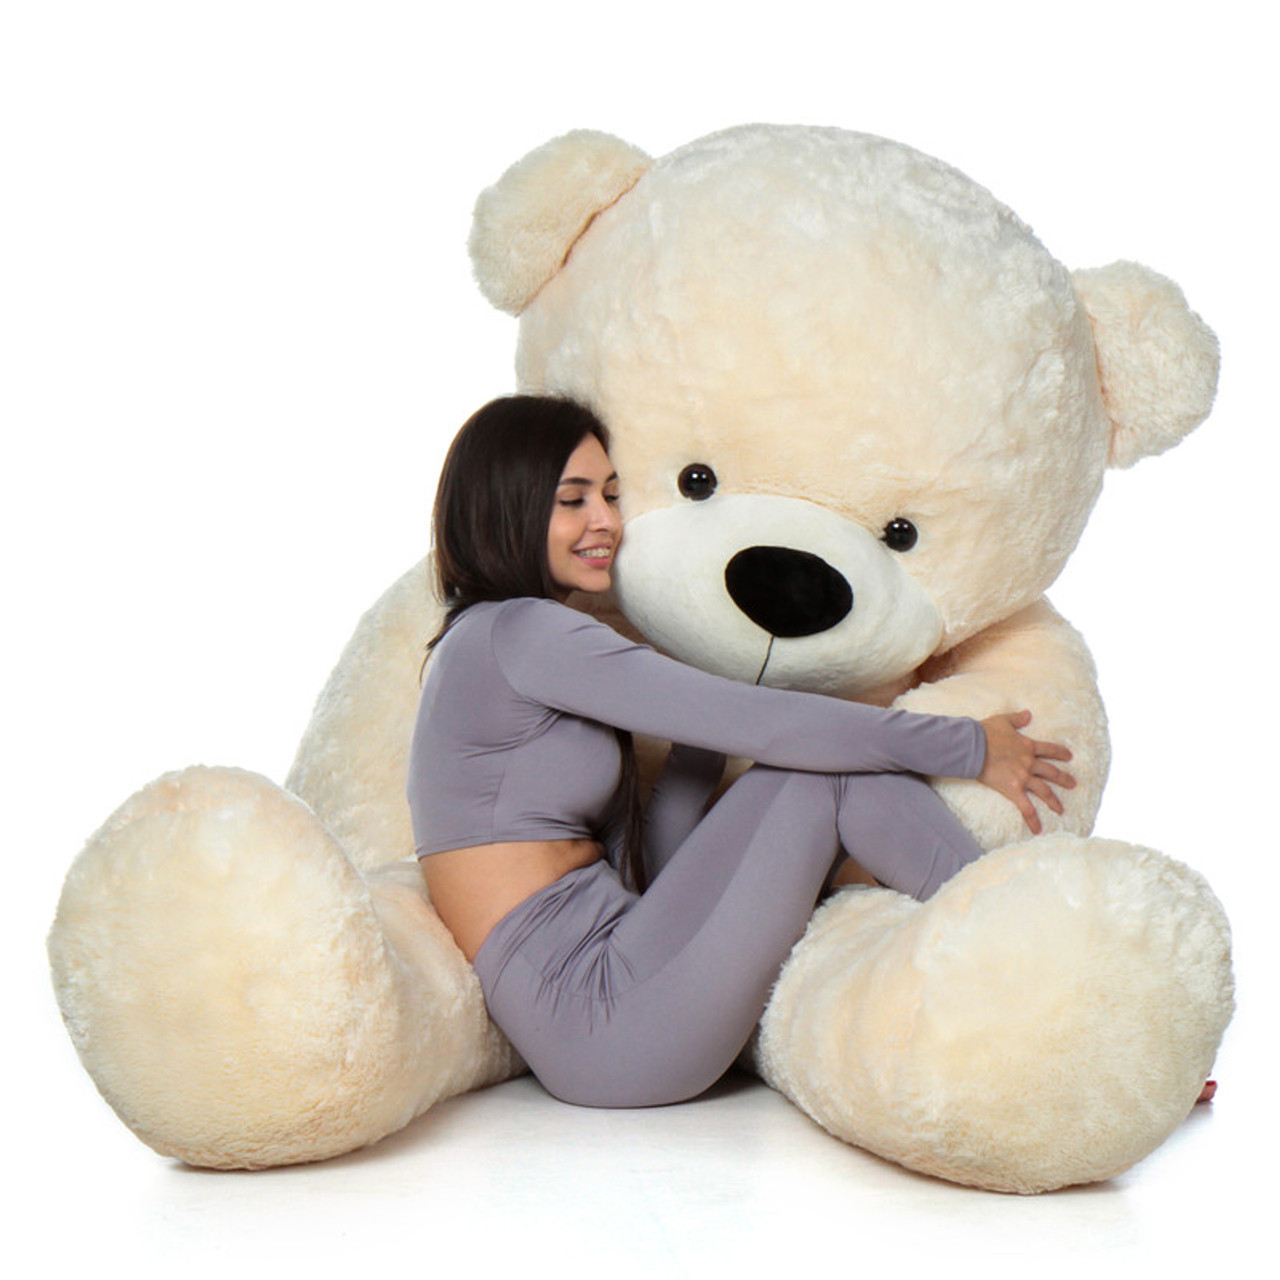 THE MOST EXPENSIVE TEDDY BEARS OF ALL TIME